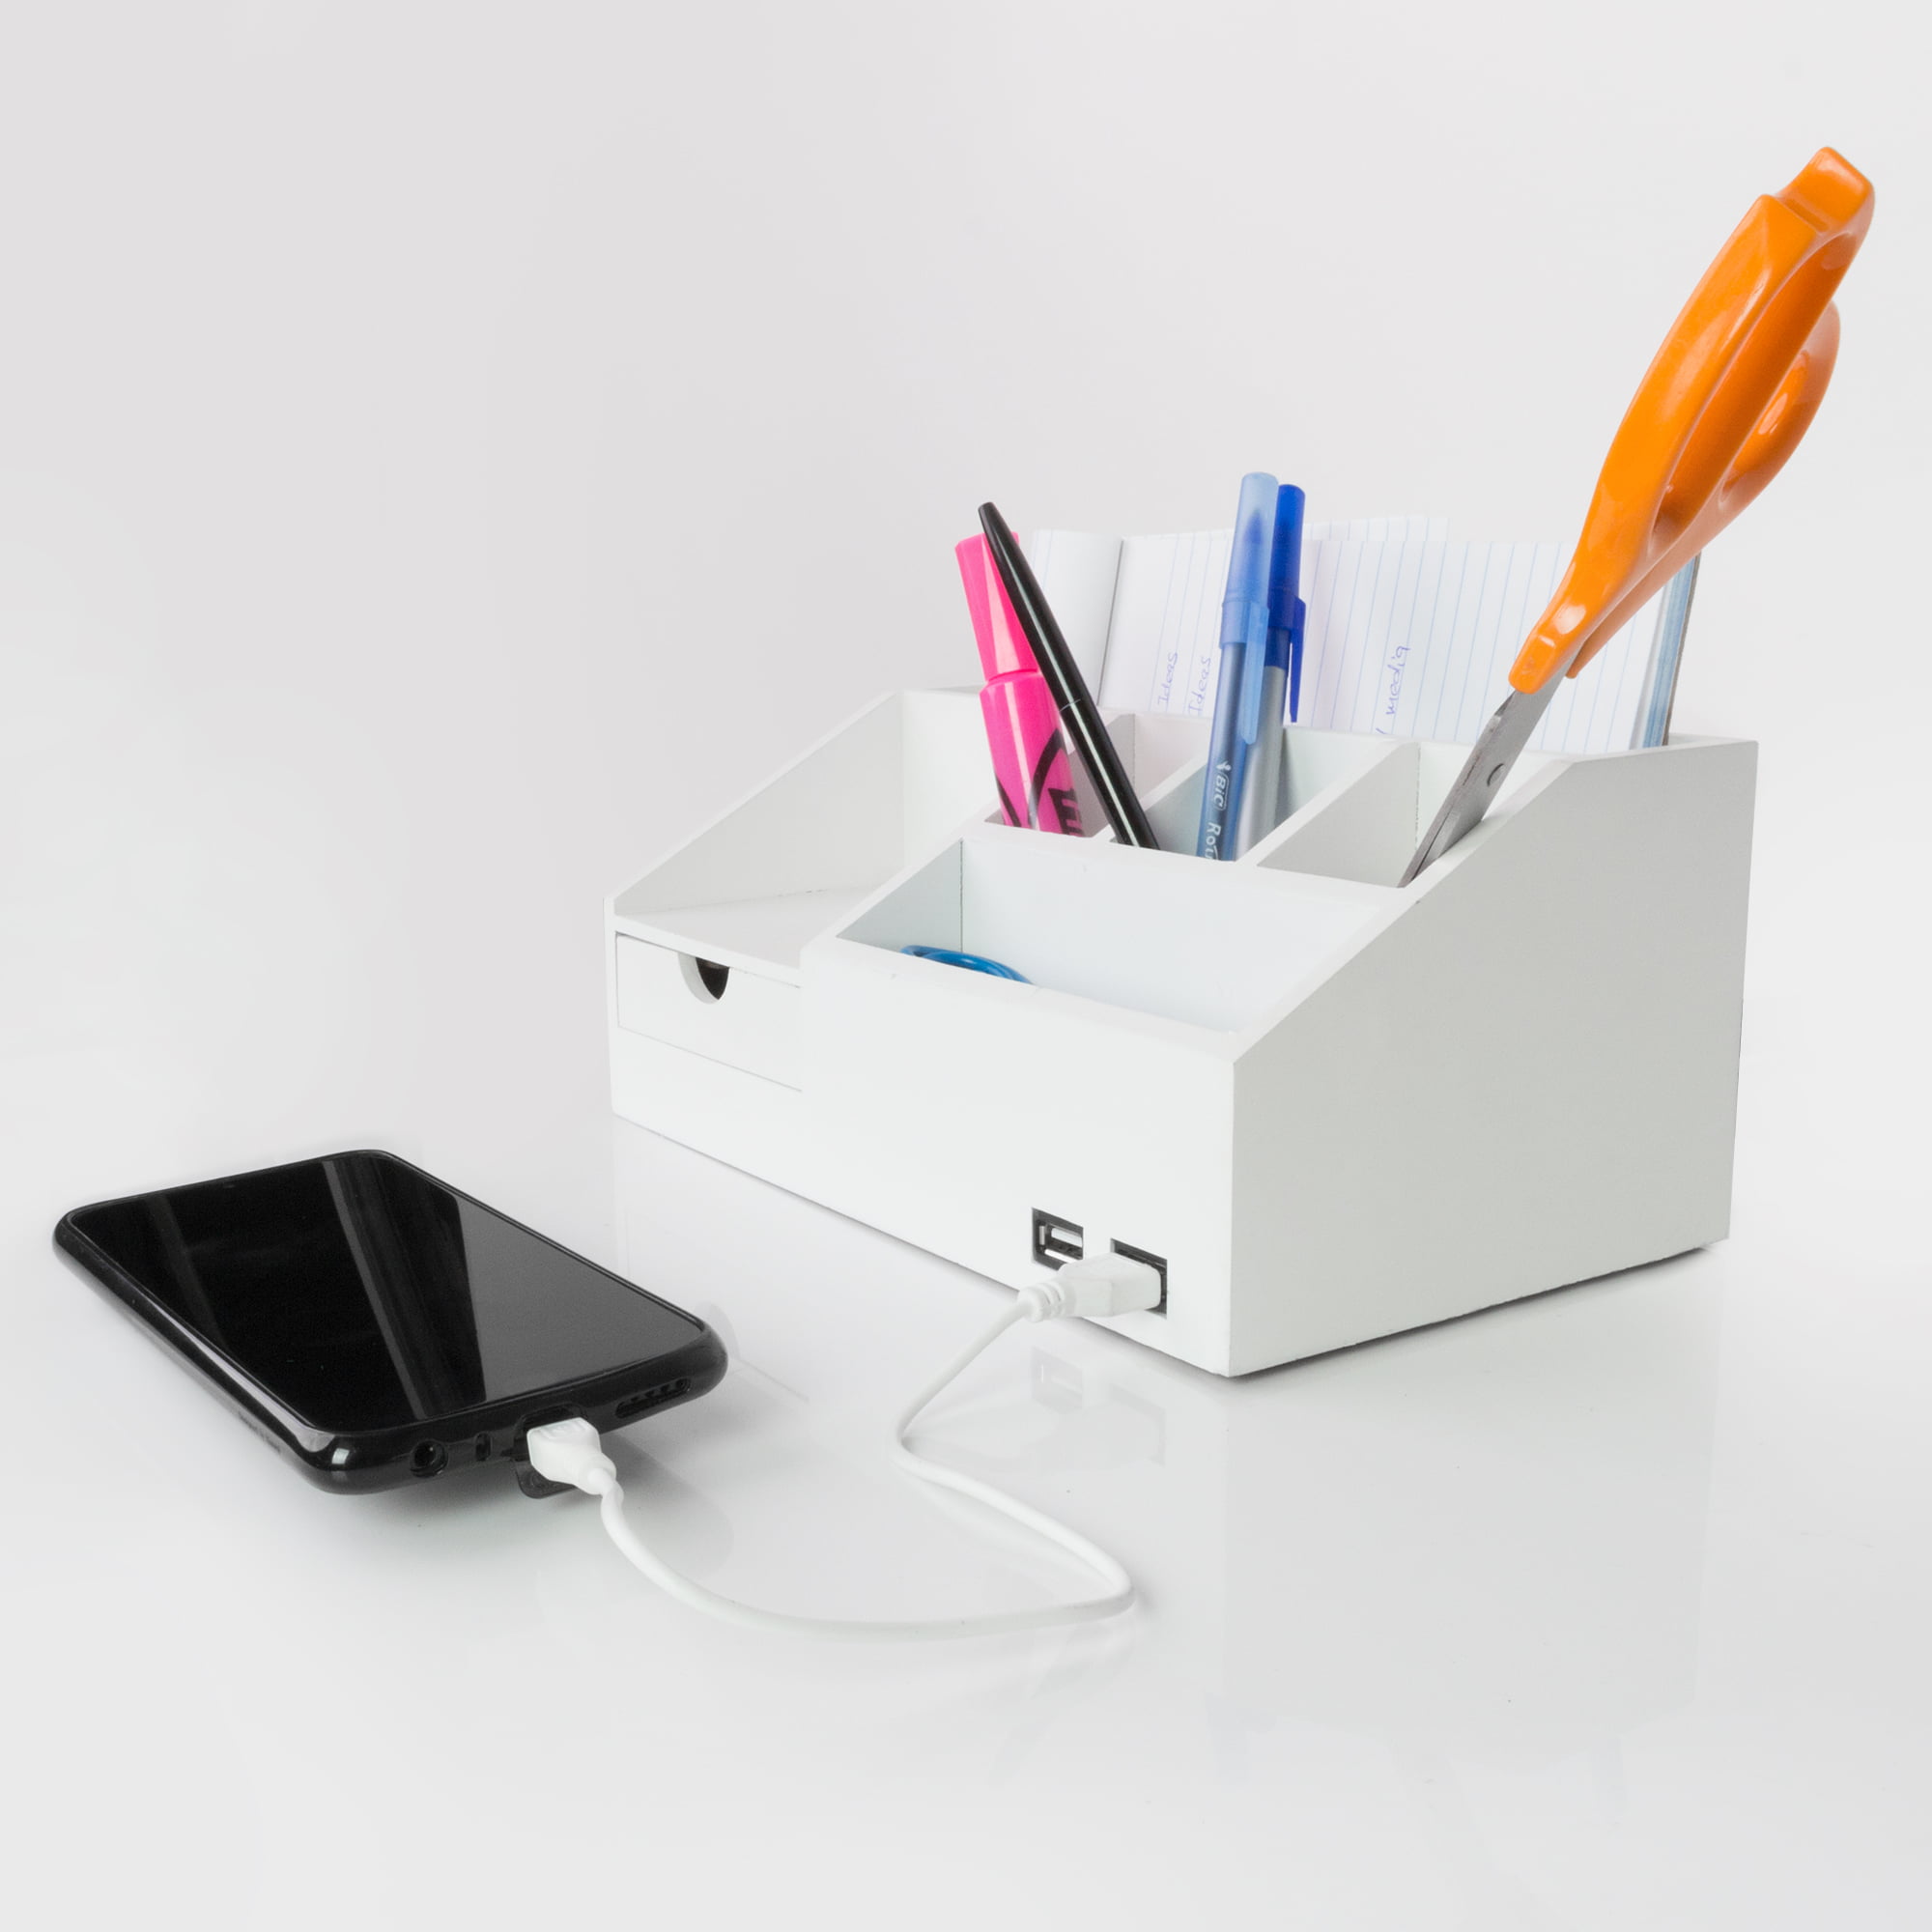 Acrylic Desk Organizer for Office Supplies and Desk Accessories, 12.5”